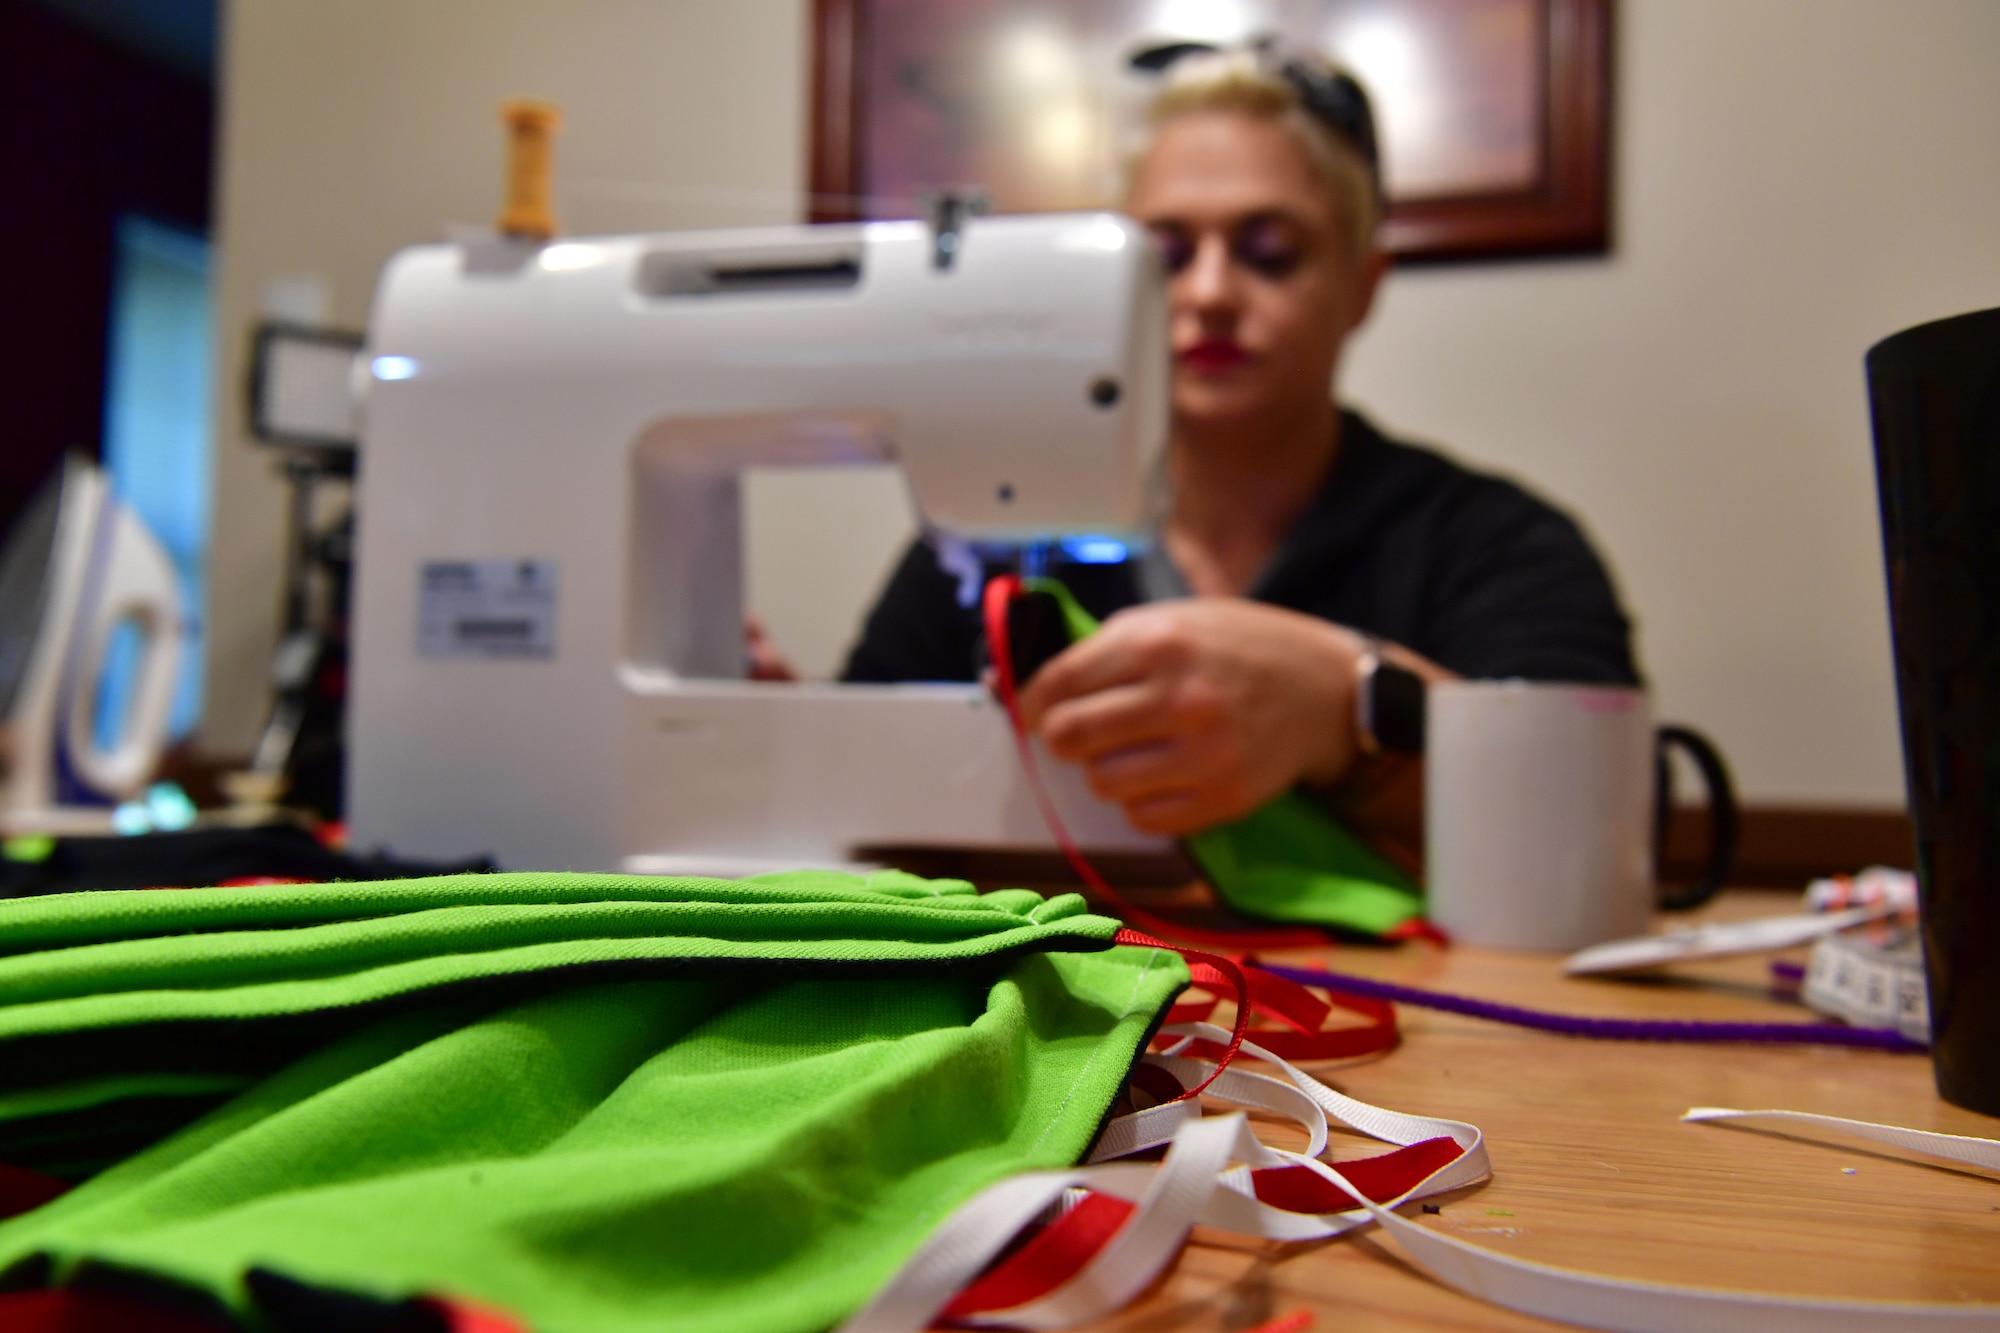 Caitlyn Bowman, spouse of U.S. Air Force Tech. Sgt. Robert Bowman, operates a sewing machine to complete a mask in Jacksonville.